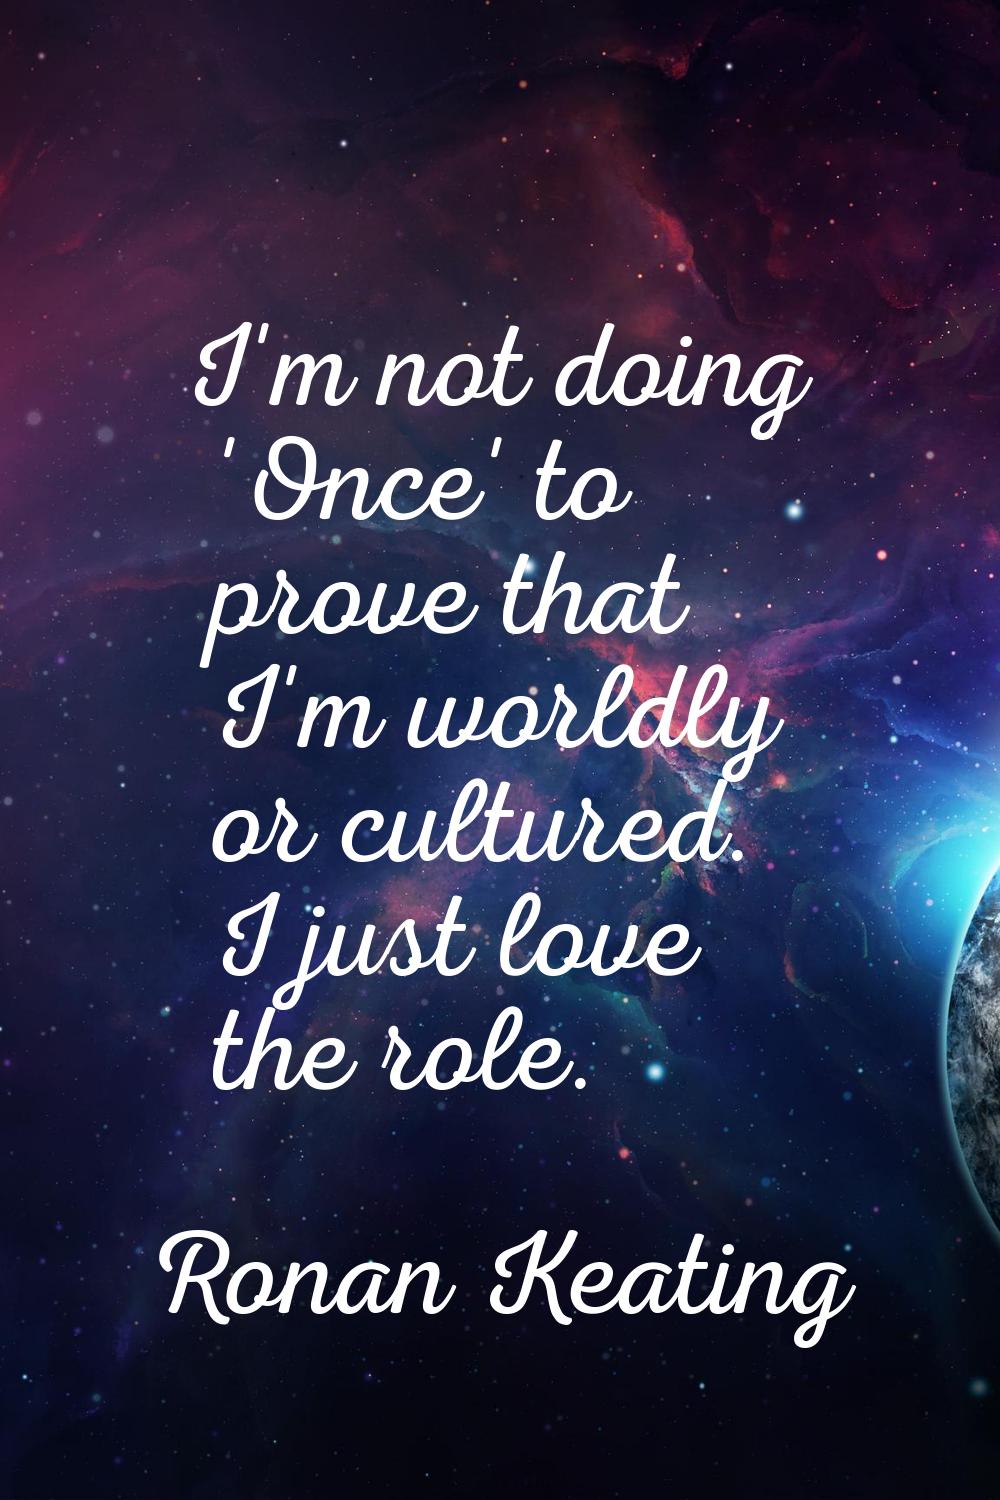 I'm not doing 'Once' to prove that I'm worldly or cultured. I just love the role.